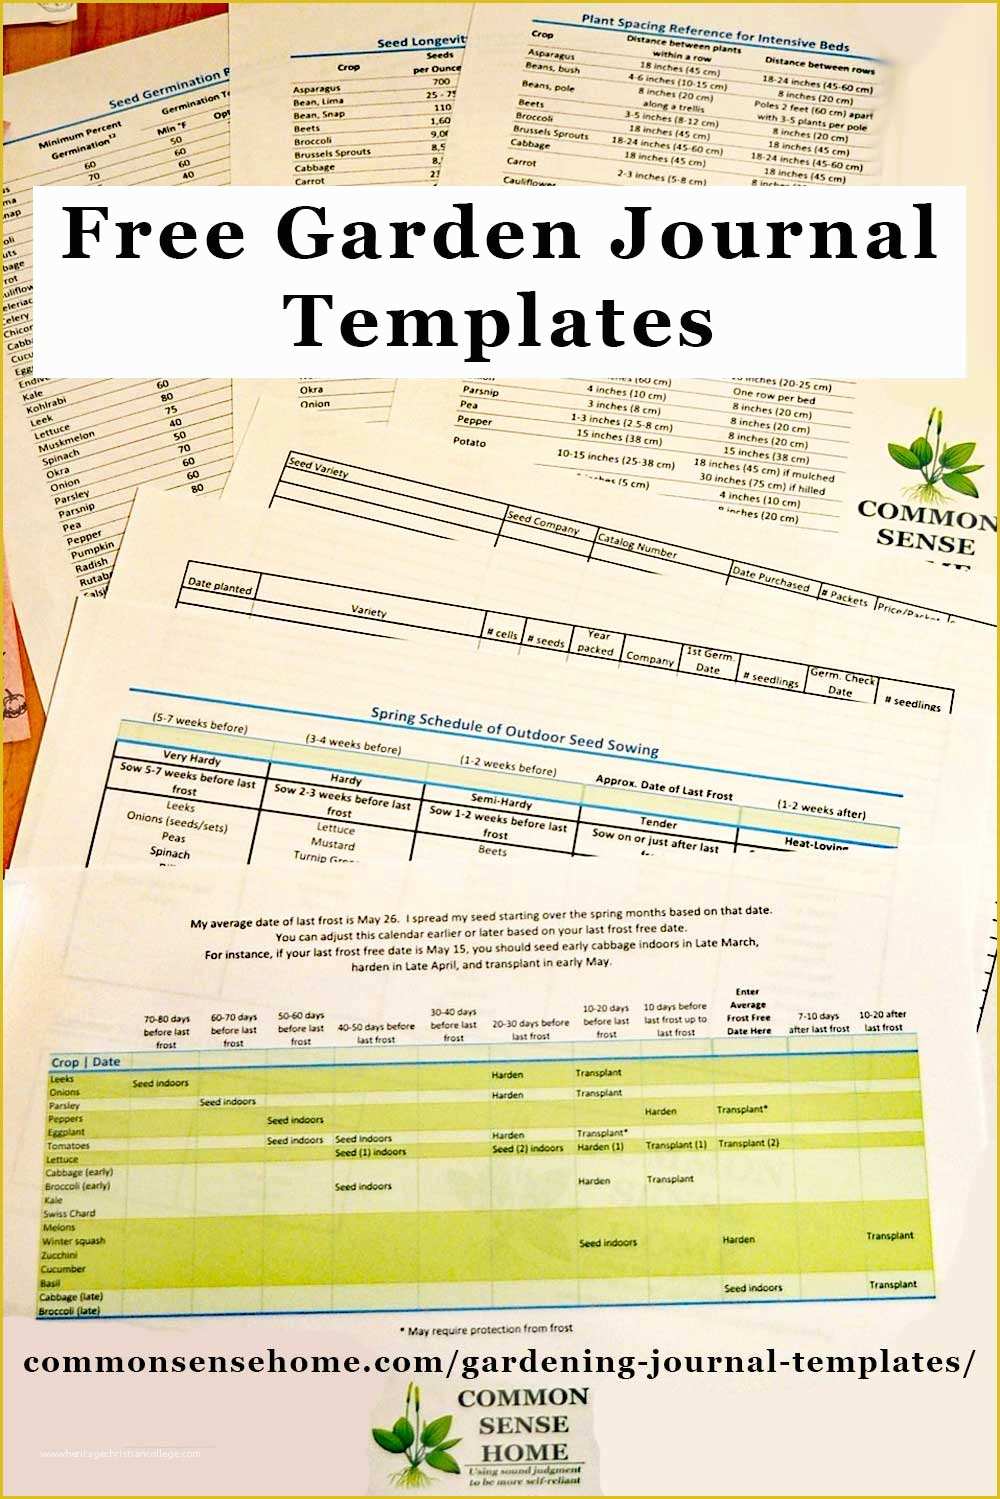 Free Record Keeping Templates Of Free Gardening Journal Templates and Other Garden Record